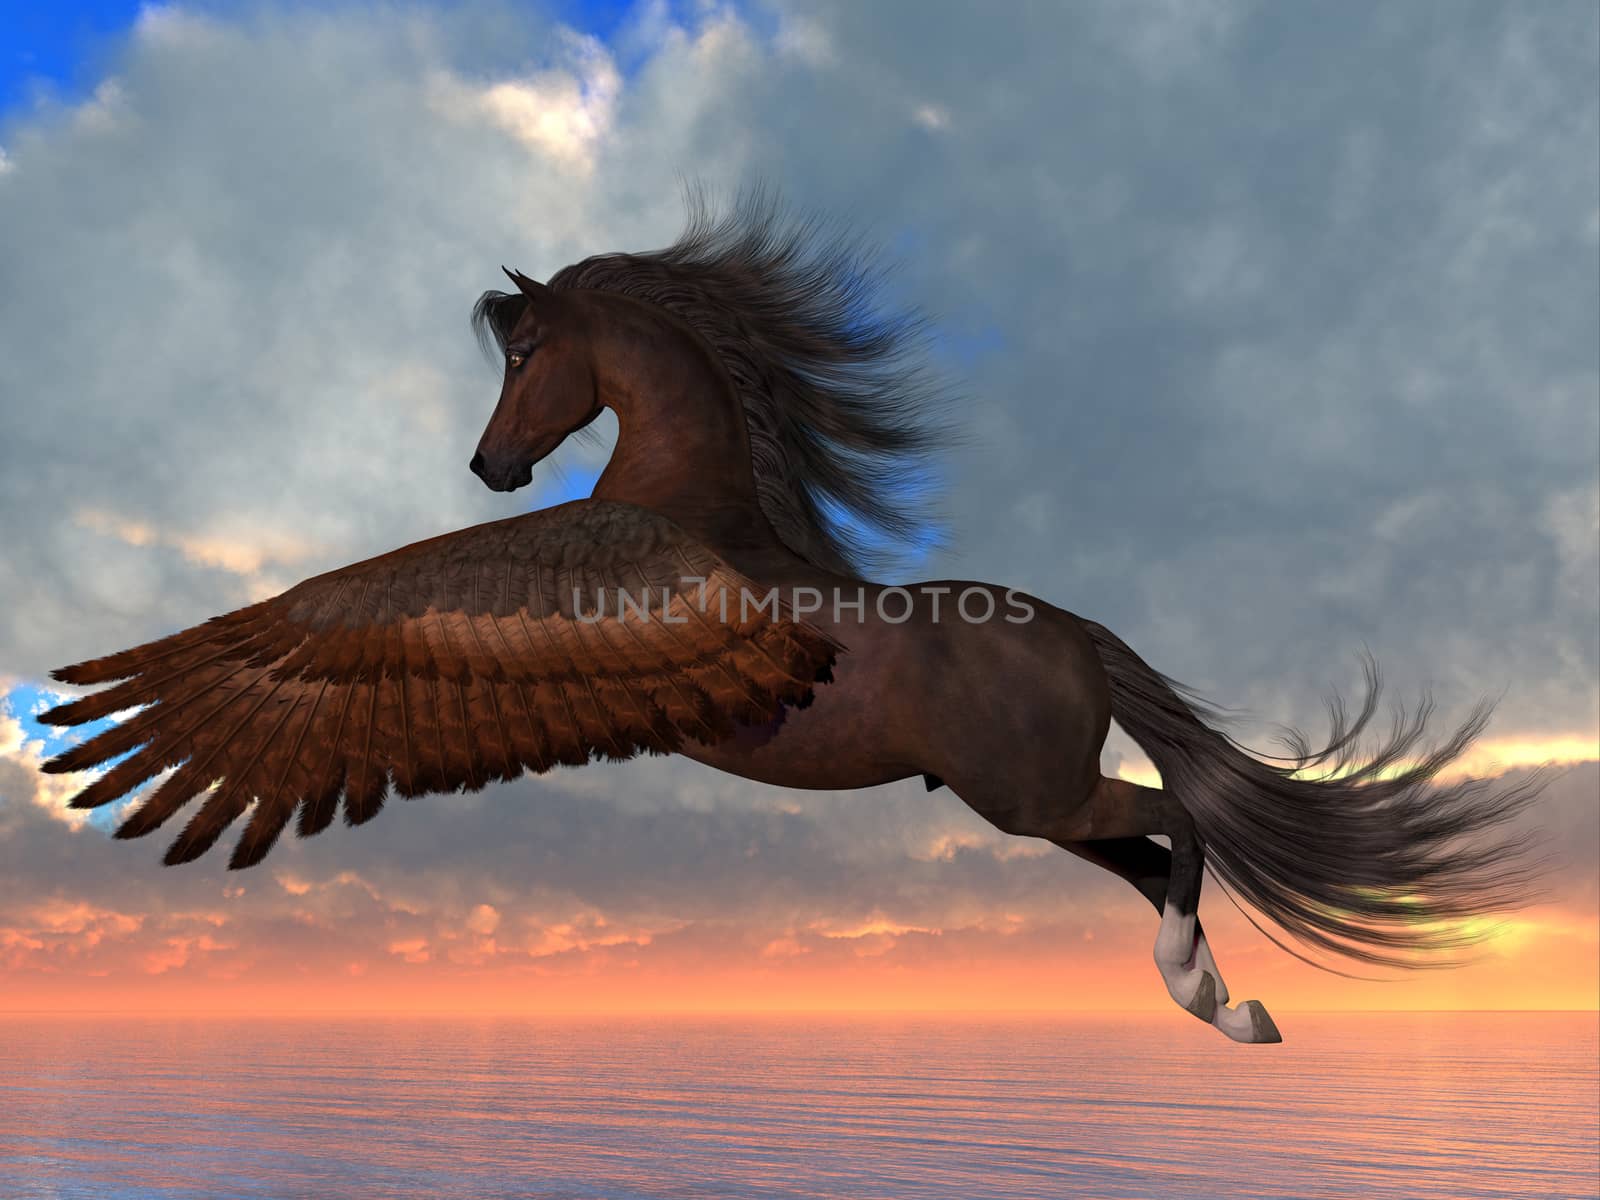 An Arabian Pegasus horse flies over the ocean with powerful wing beats on his way to his destination.